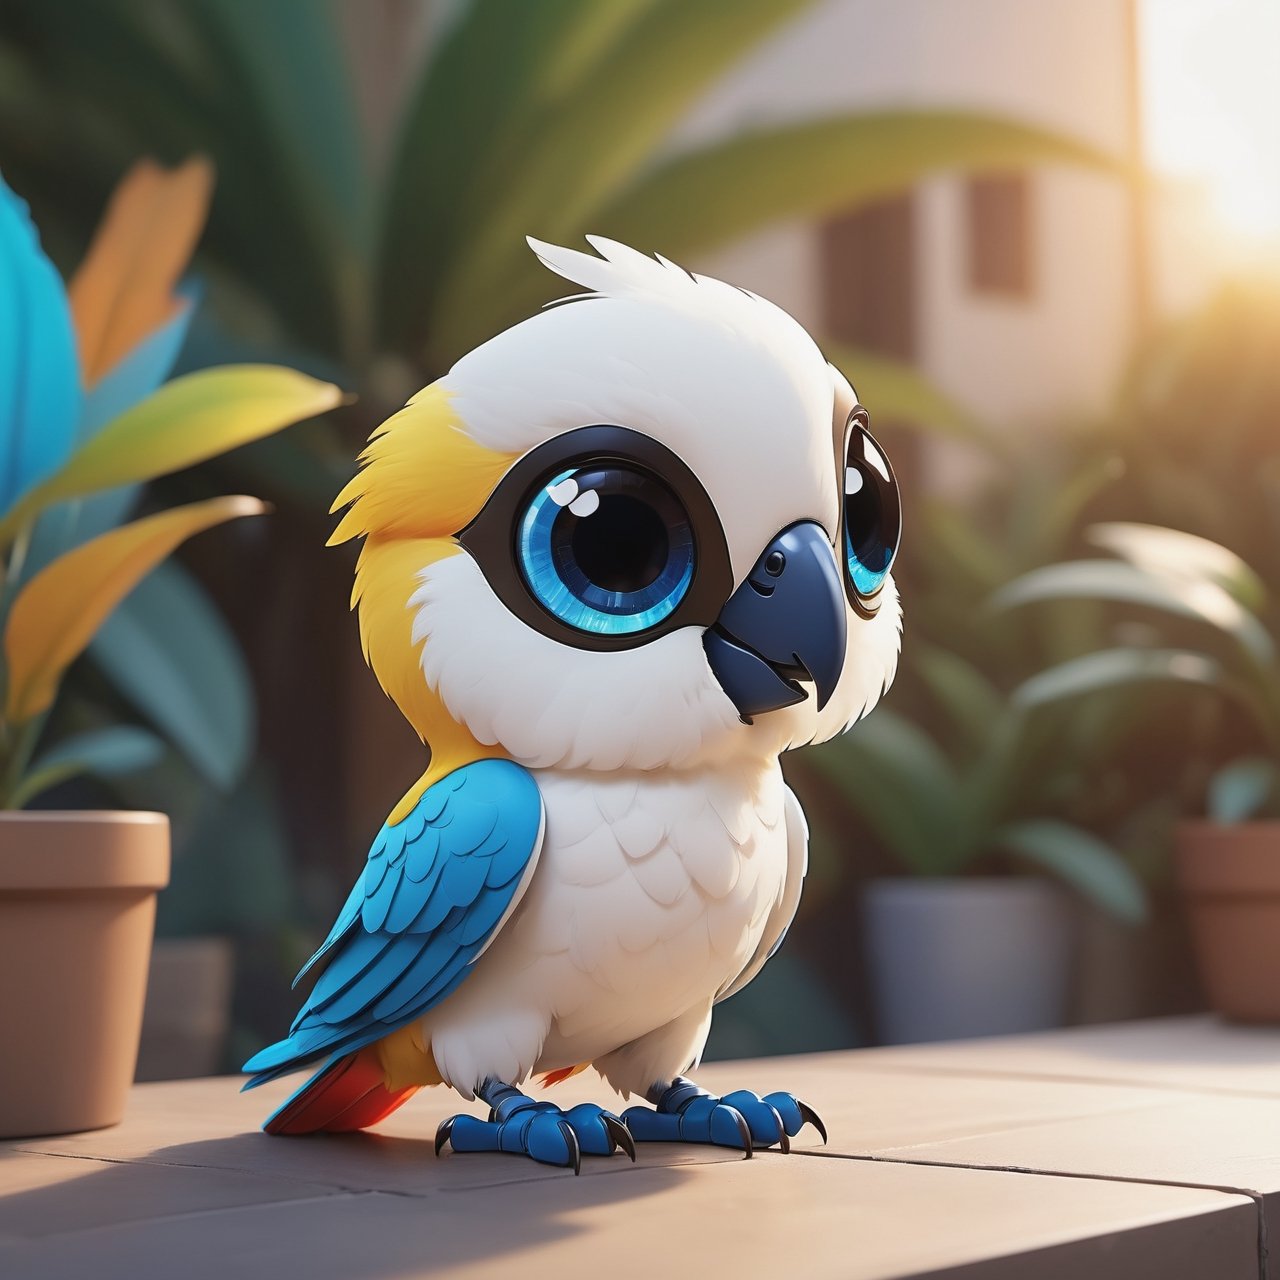 (masterpiece:1.2, highest quality), (realistic, photo_realistic:1.9)
1chibi_parrot, Cute chibi white parrot, happy face, Chest written "TA", (Designer look holding a paintbrush in one hand), white with blue, (detailed background), (gradients), colorful, detailed landscape, visual key, shiny skin. Modern place, Action camera. Portrait film. Standard lens. Golden hour lighting.
sharp focus, 8k, UHD, high quality, frowning, intricate detailed, highly detailed, hyper-realistic,interior,robot white with blue,chibi emote style,Monster, wall-e